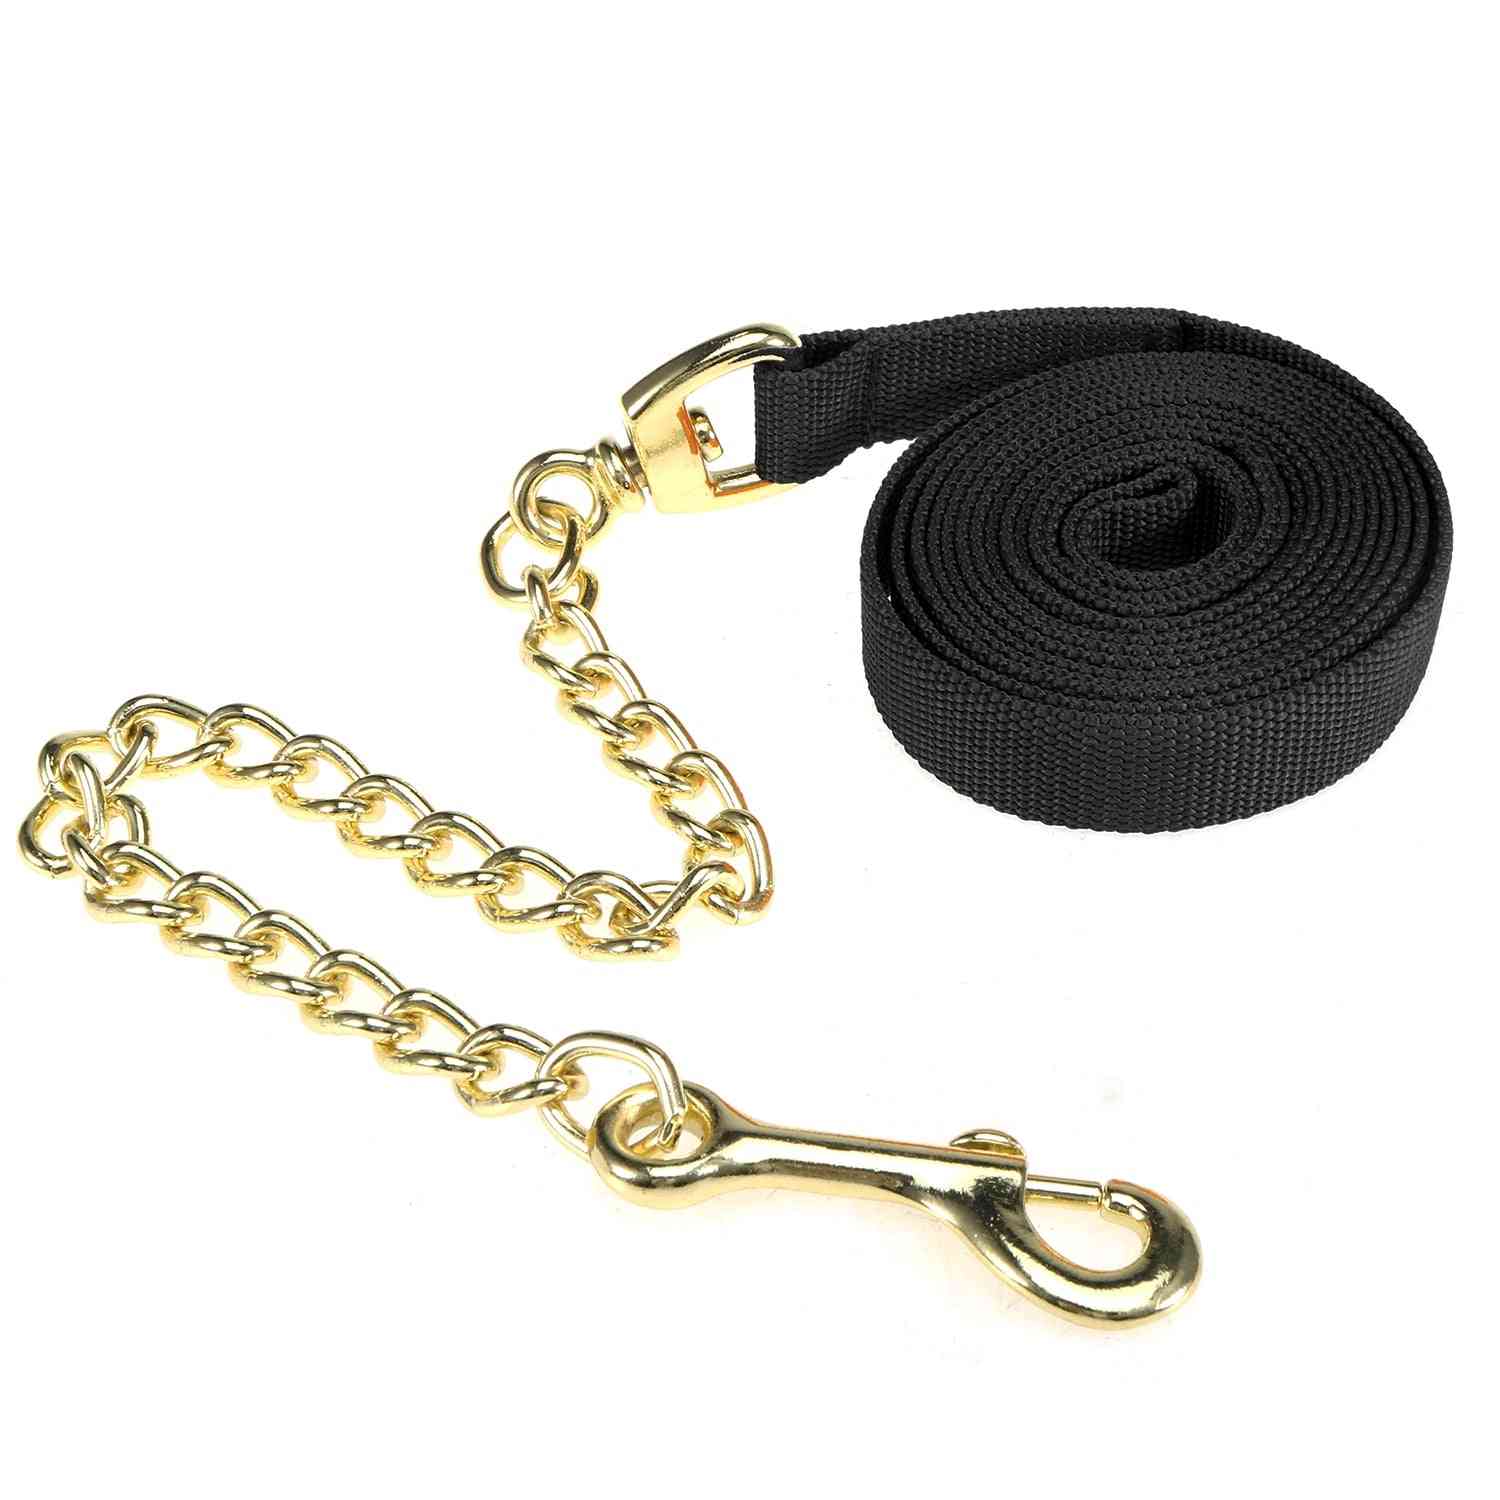 8.5ft Lunge Line Leash Halter With Chain - Pet Dog Training